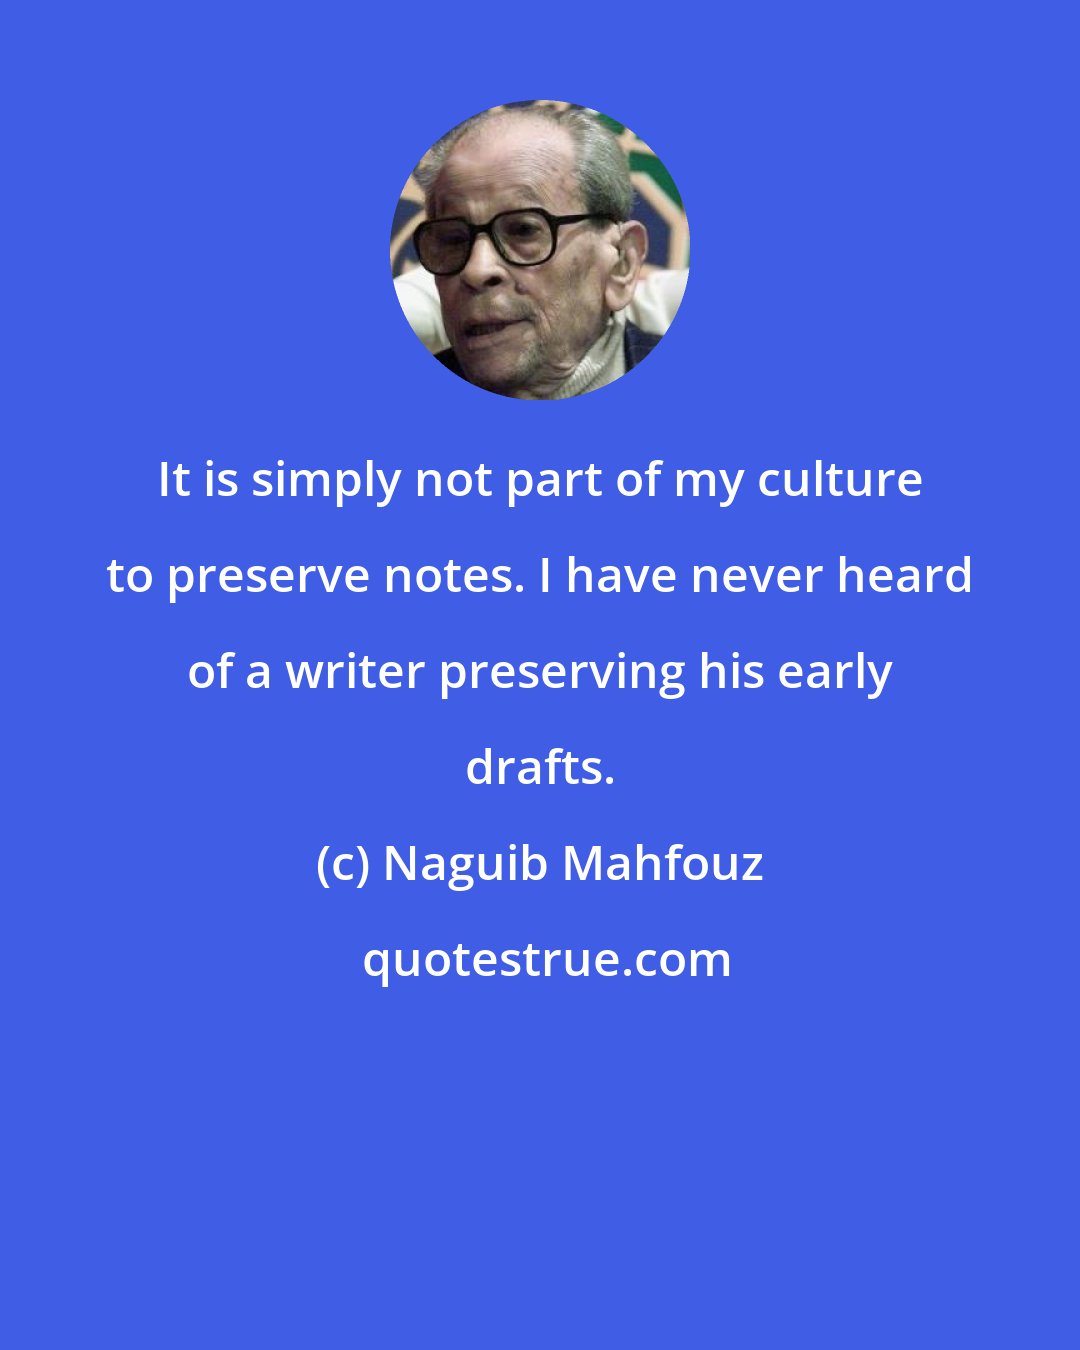 Naguib Mahfouz: It is simply not part of my culture to preserve notes. I have never heard of a writer preserving his early drafts.